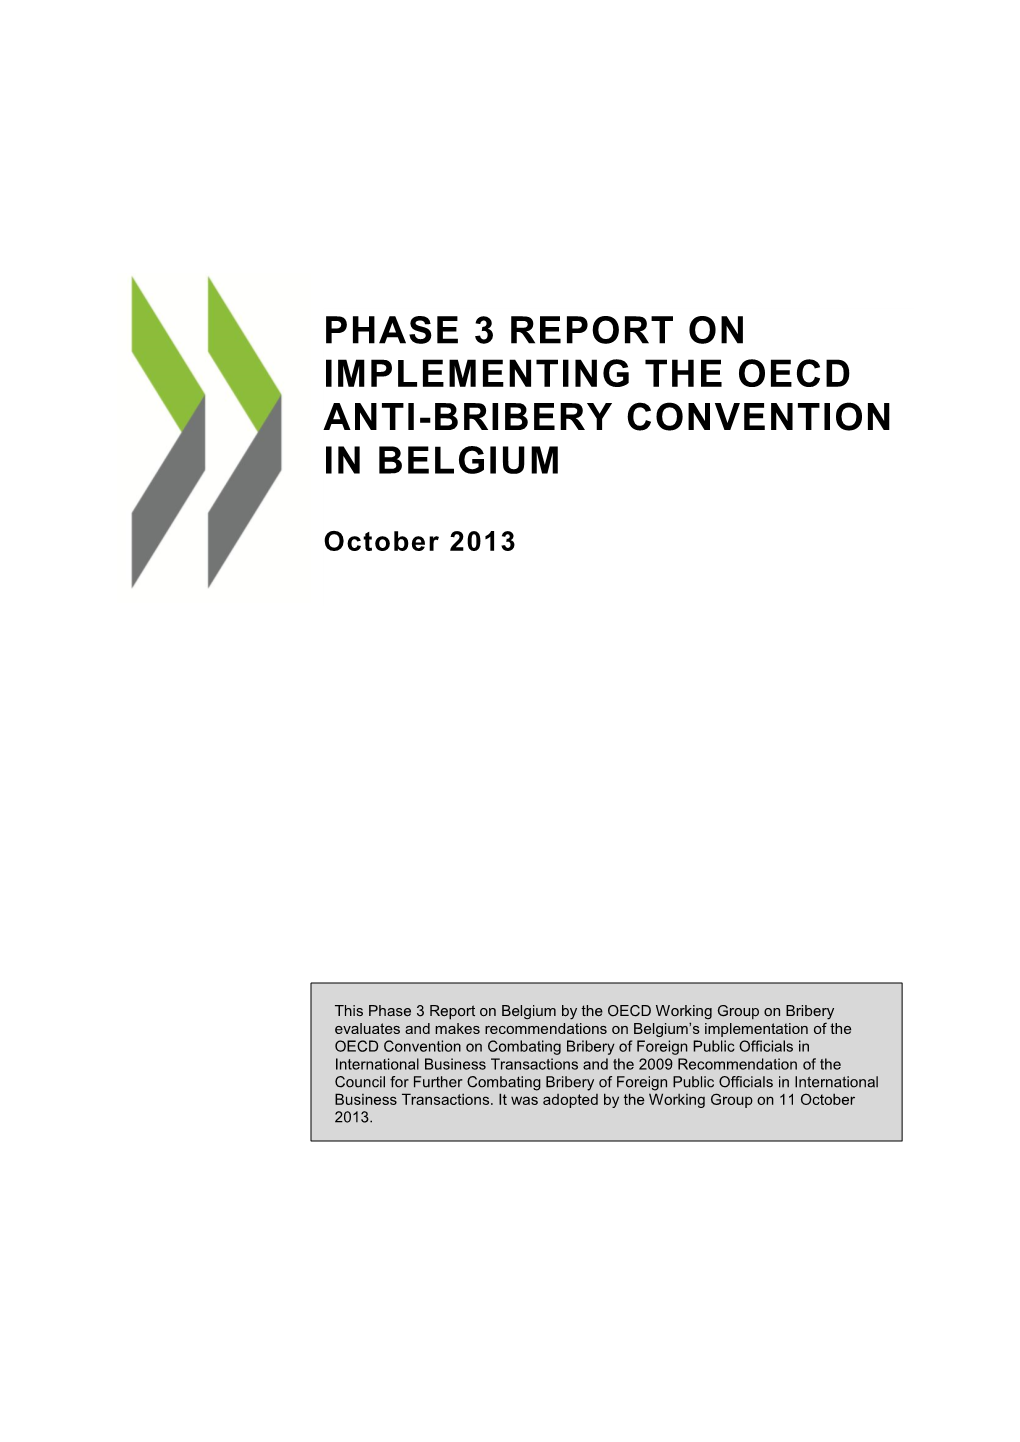 Phase 3 Report on Implementing the OECD Anti-Bribery Convention In